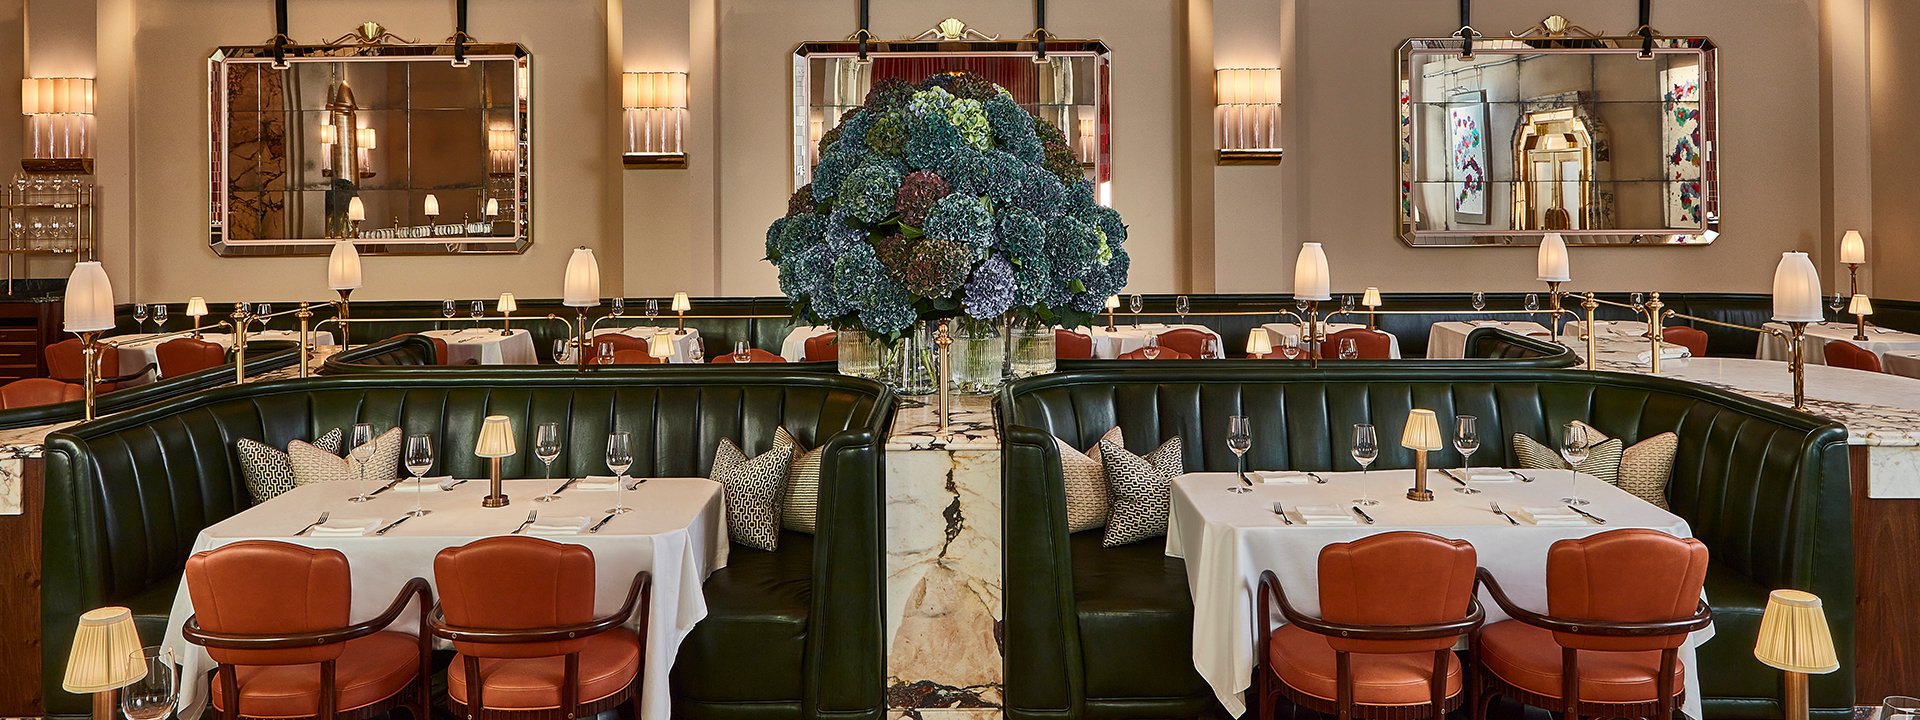 Claridge's Restaurant room with beautiful flowers and table dressed up.